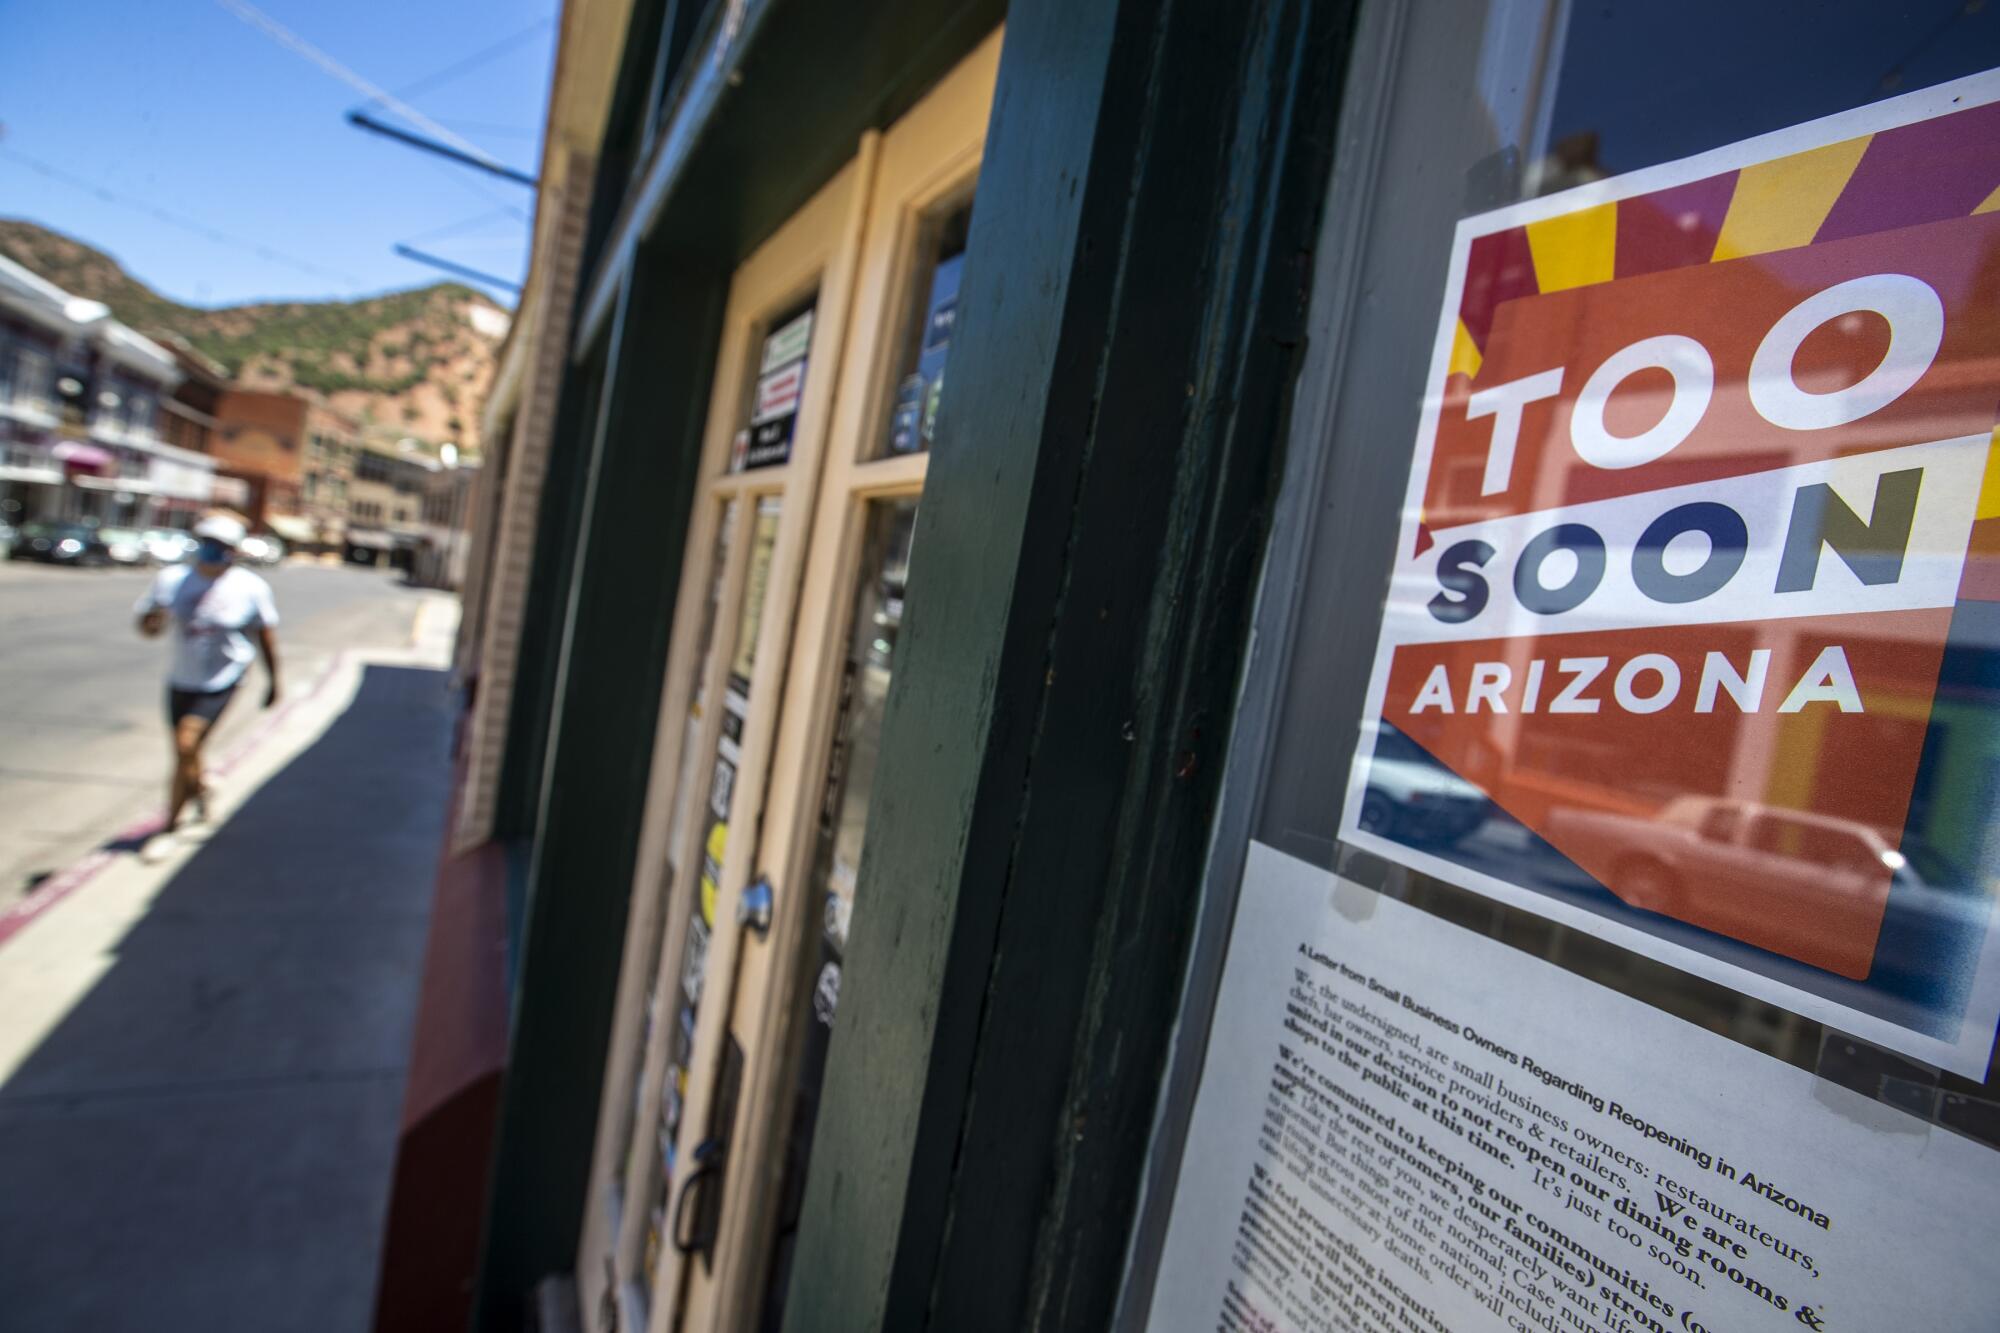 The "Too Soon Arizona" movement is dividing business owners in the tourist town of Bisbee.